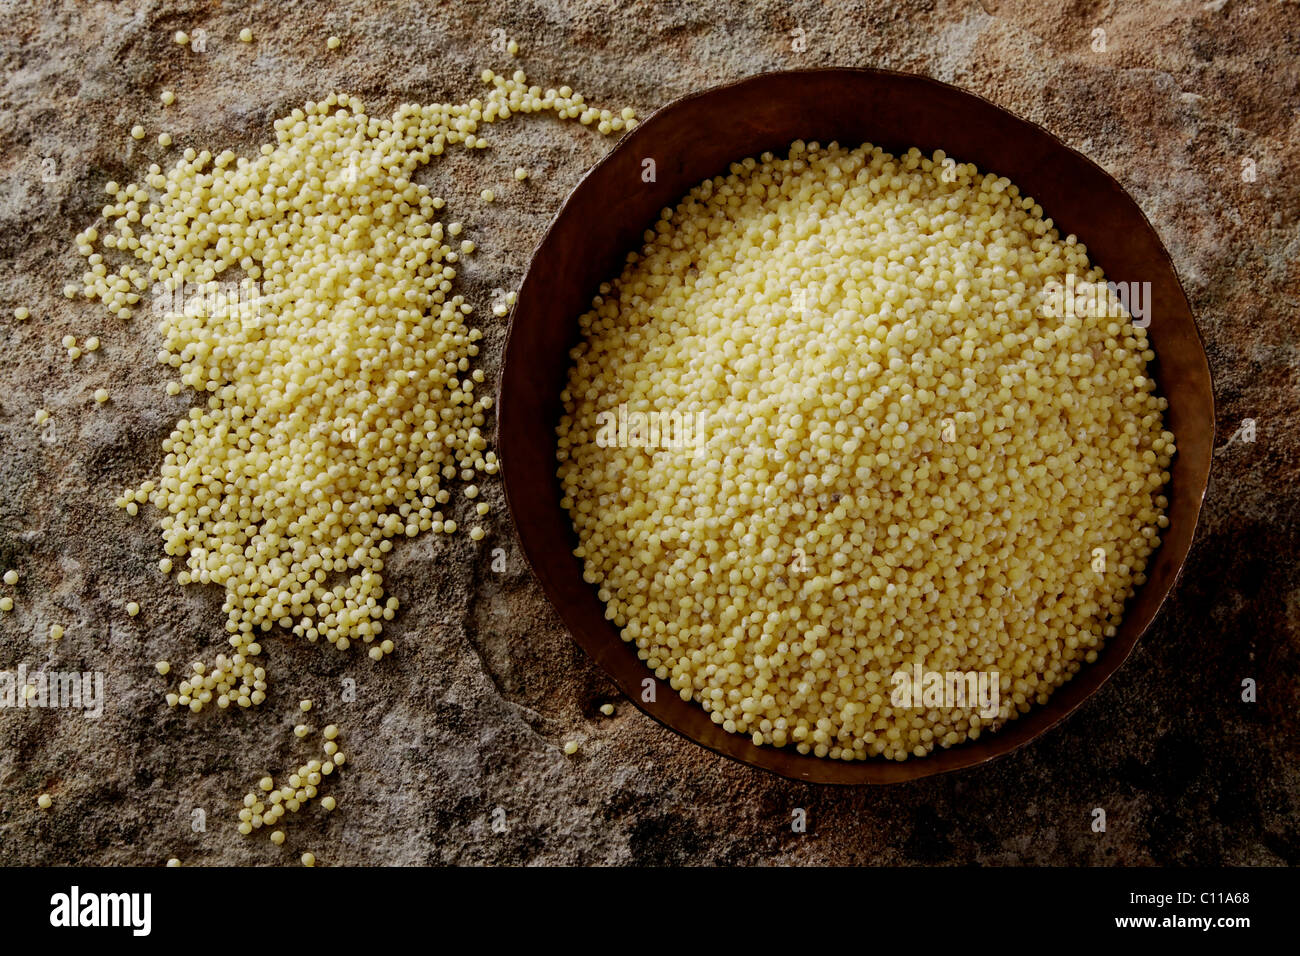 Millet (Panicum miliaceum) in a copper bowl on a stone surface Stock Photo